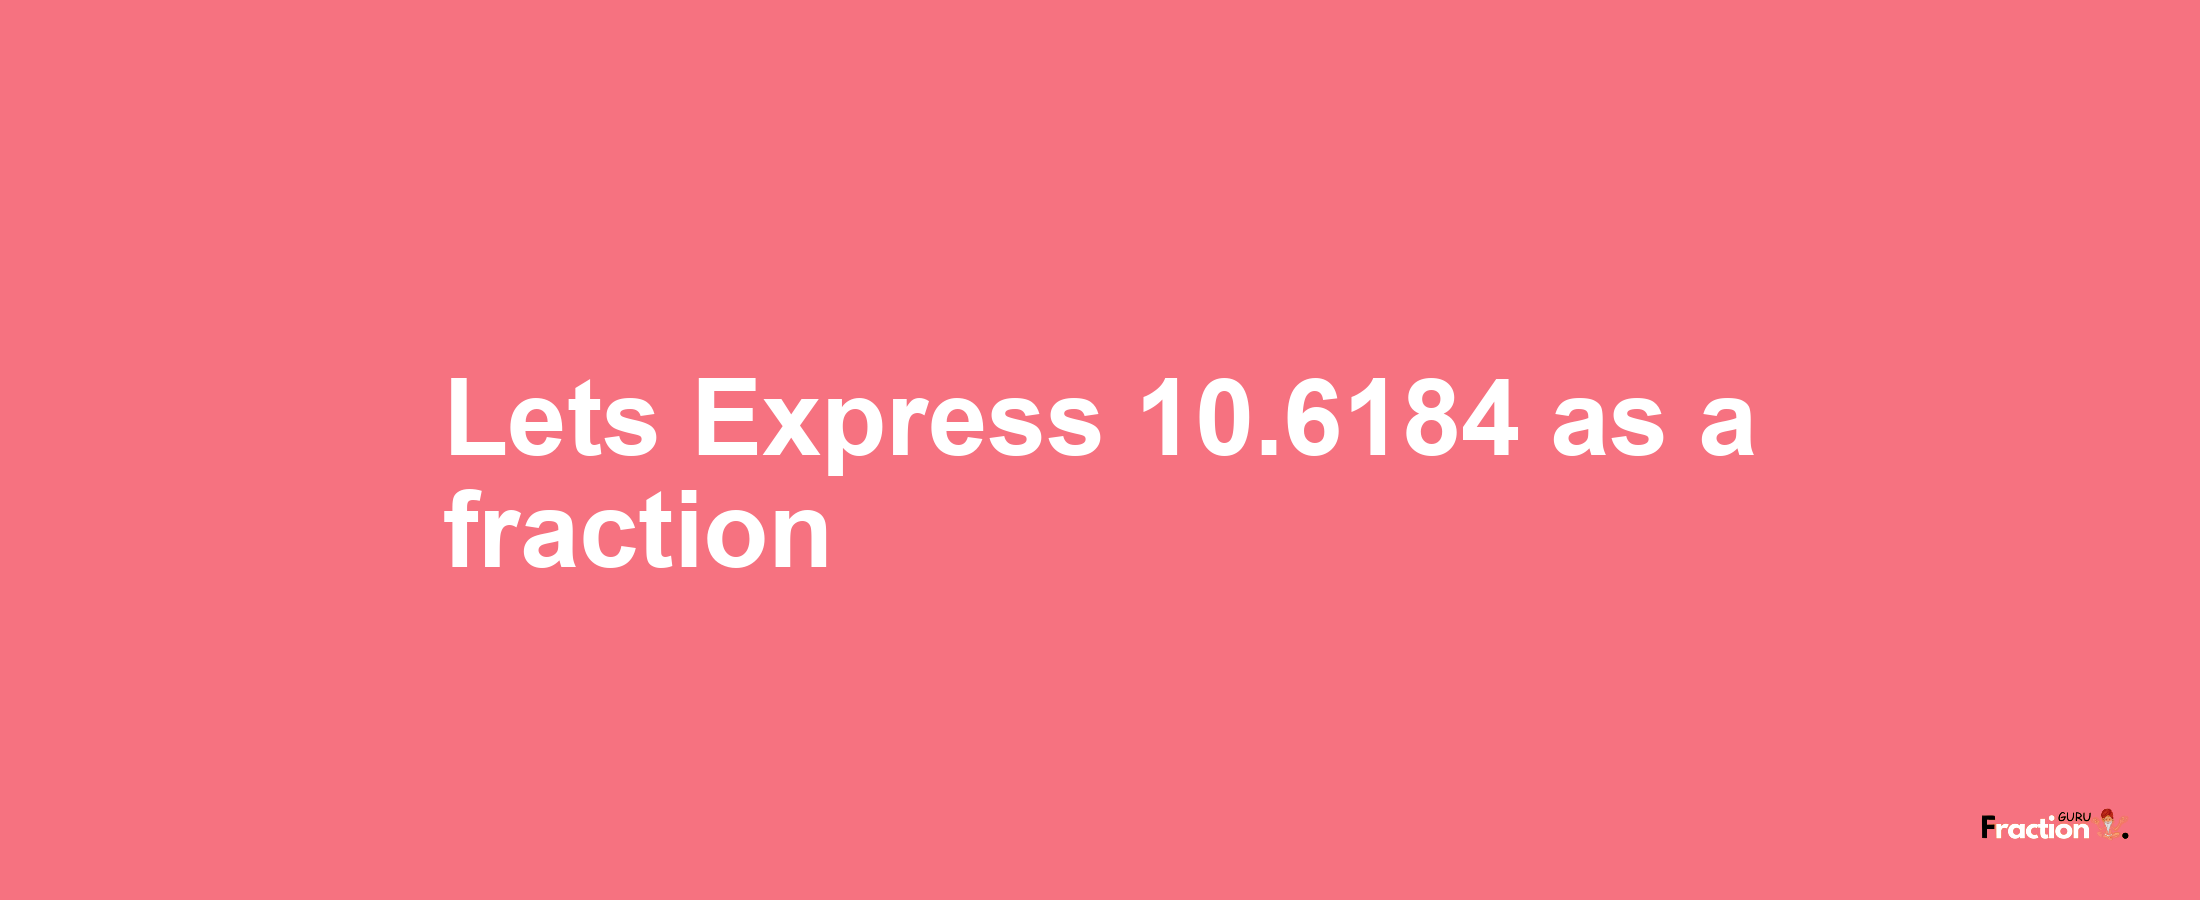 Lets Express 10.6184 as afraction